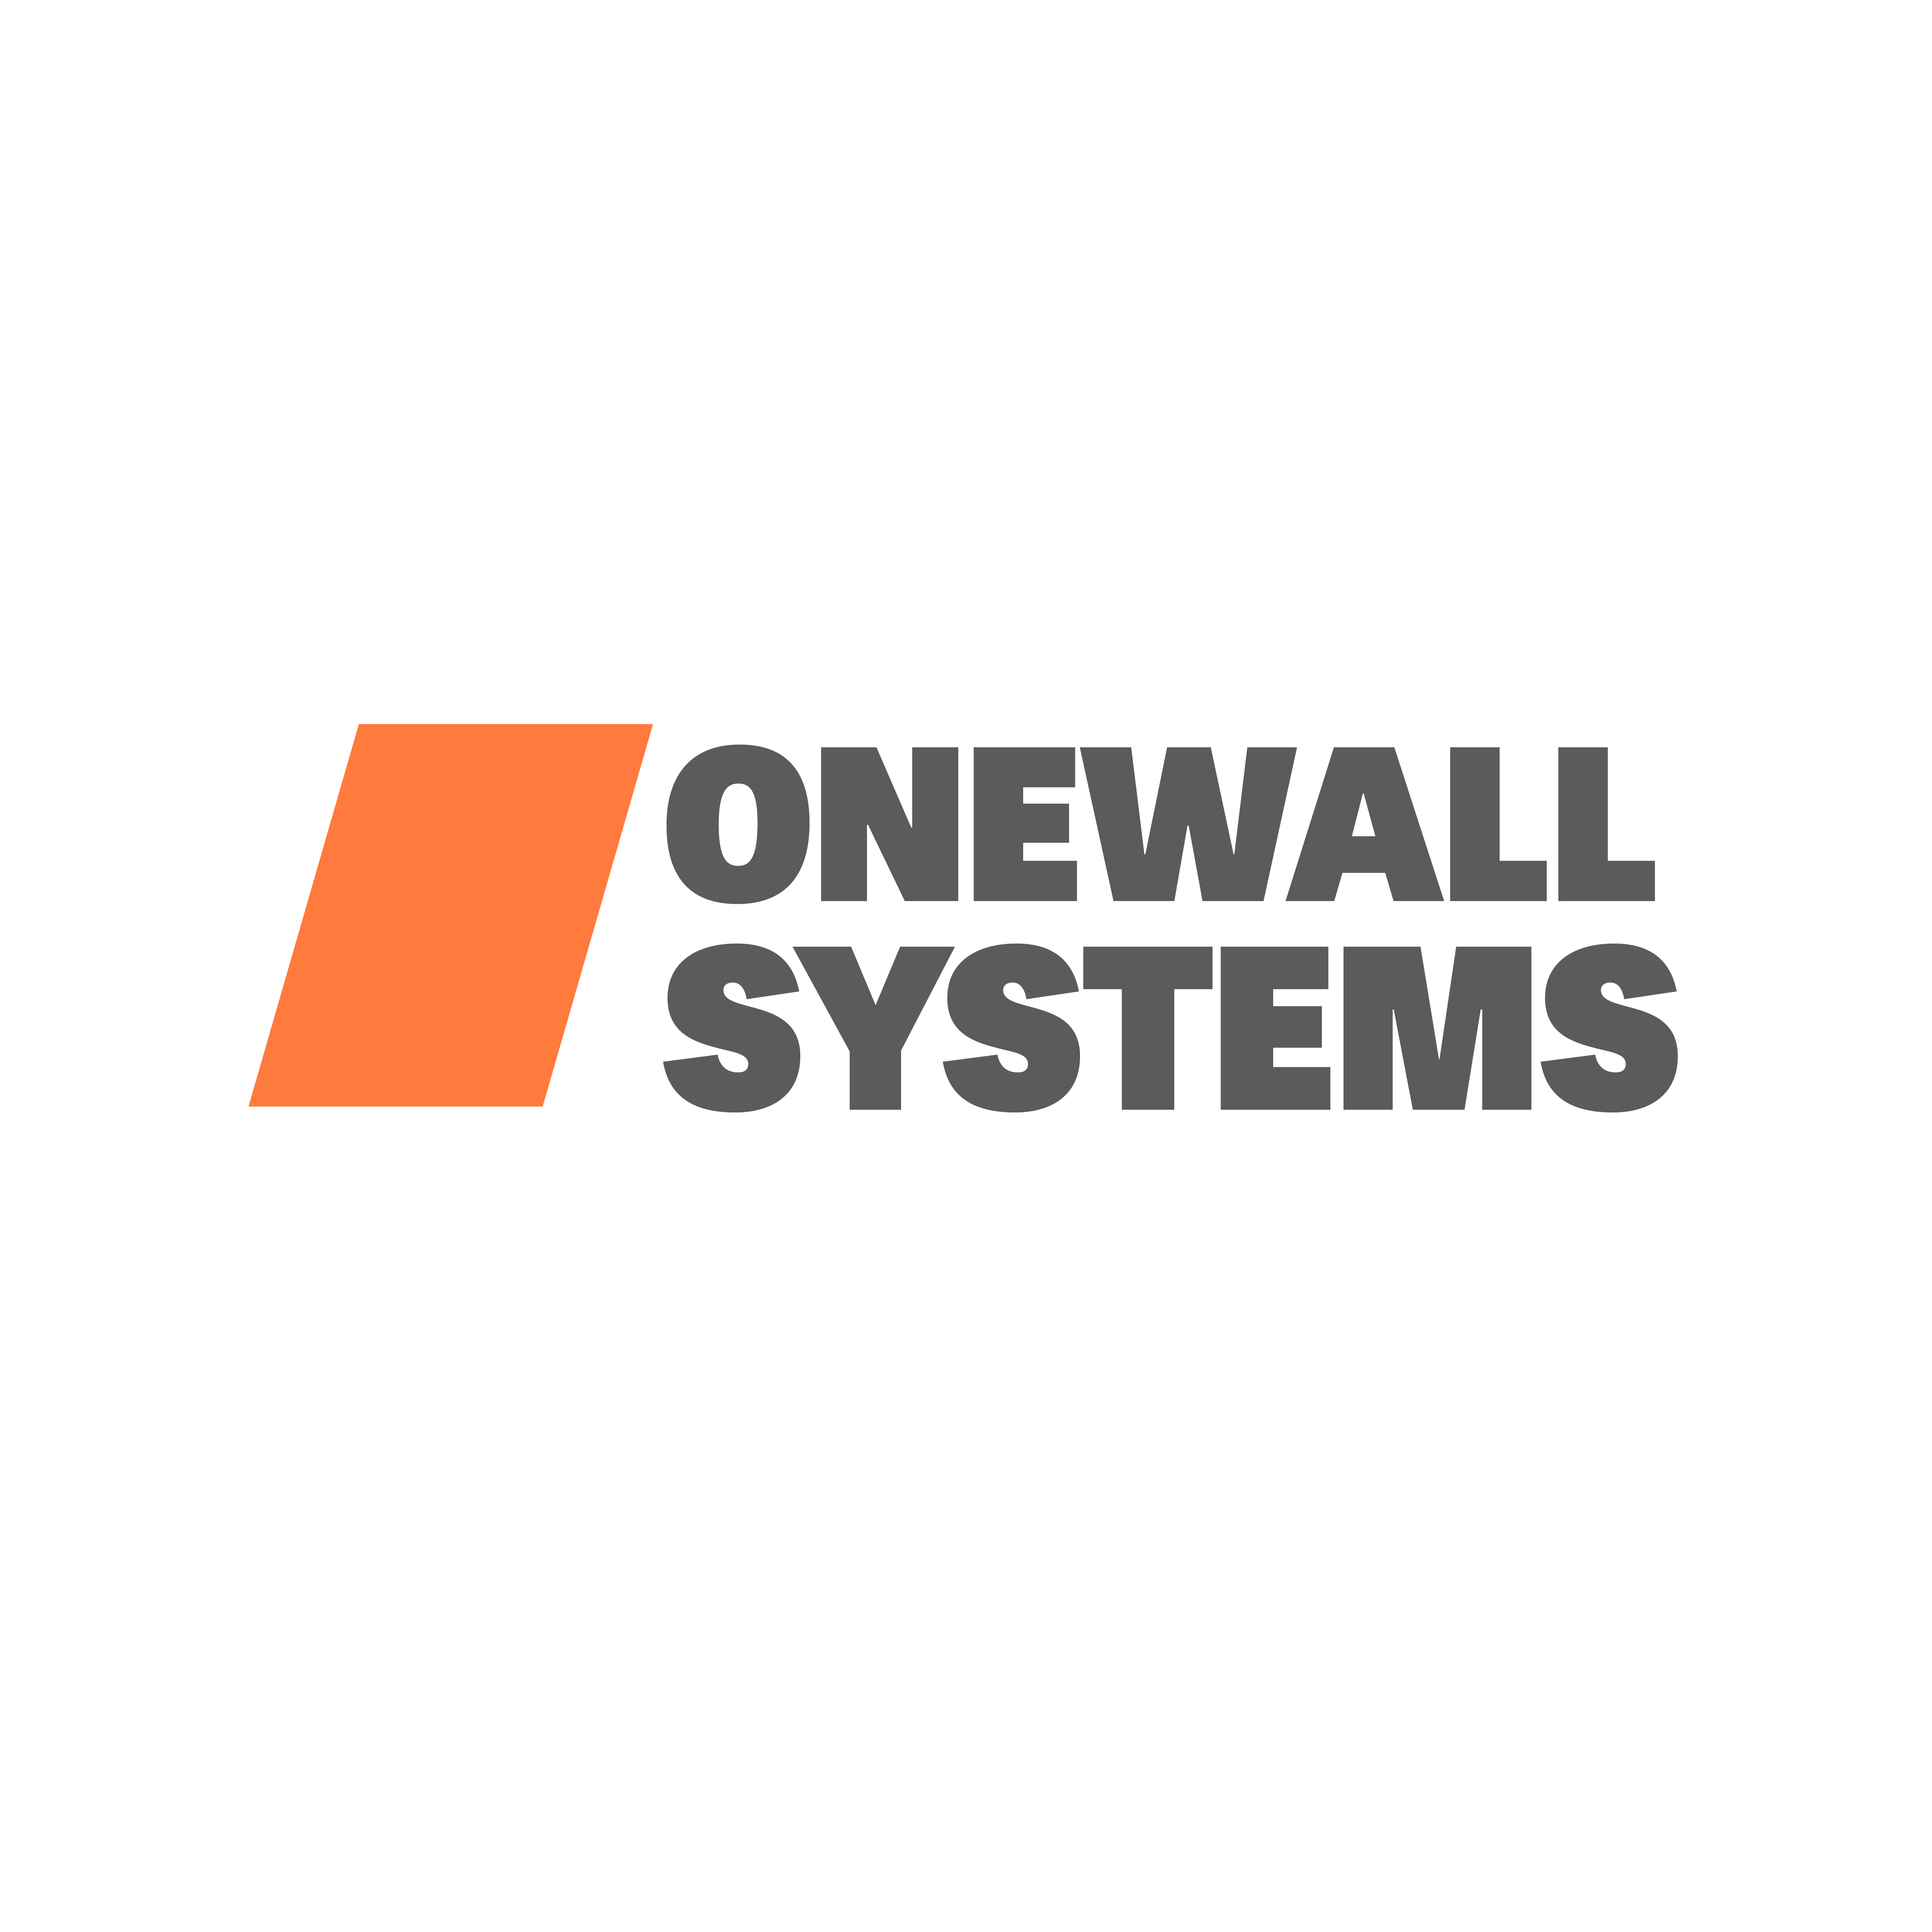 onewall systems logo